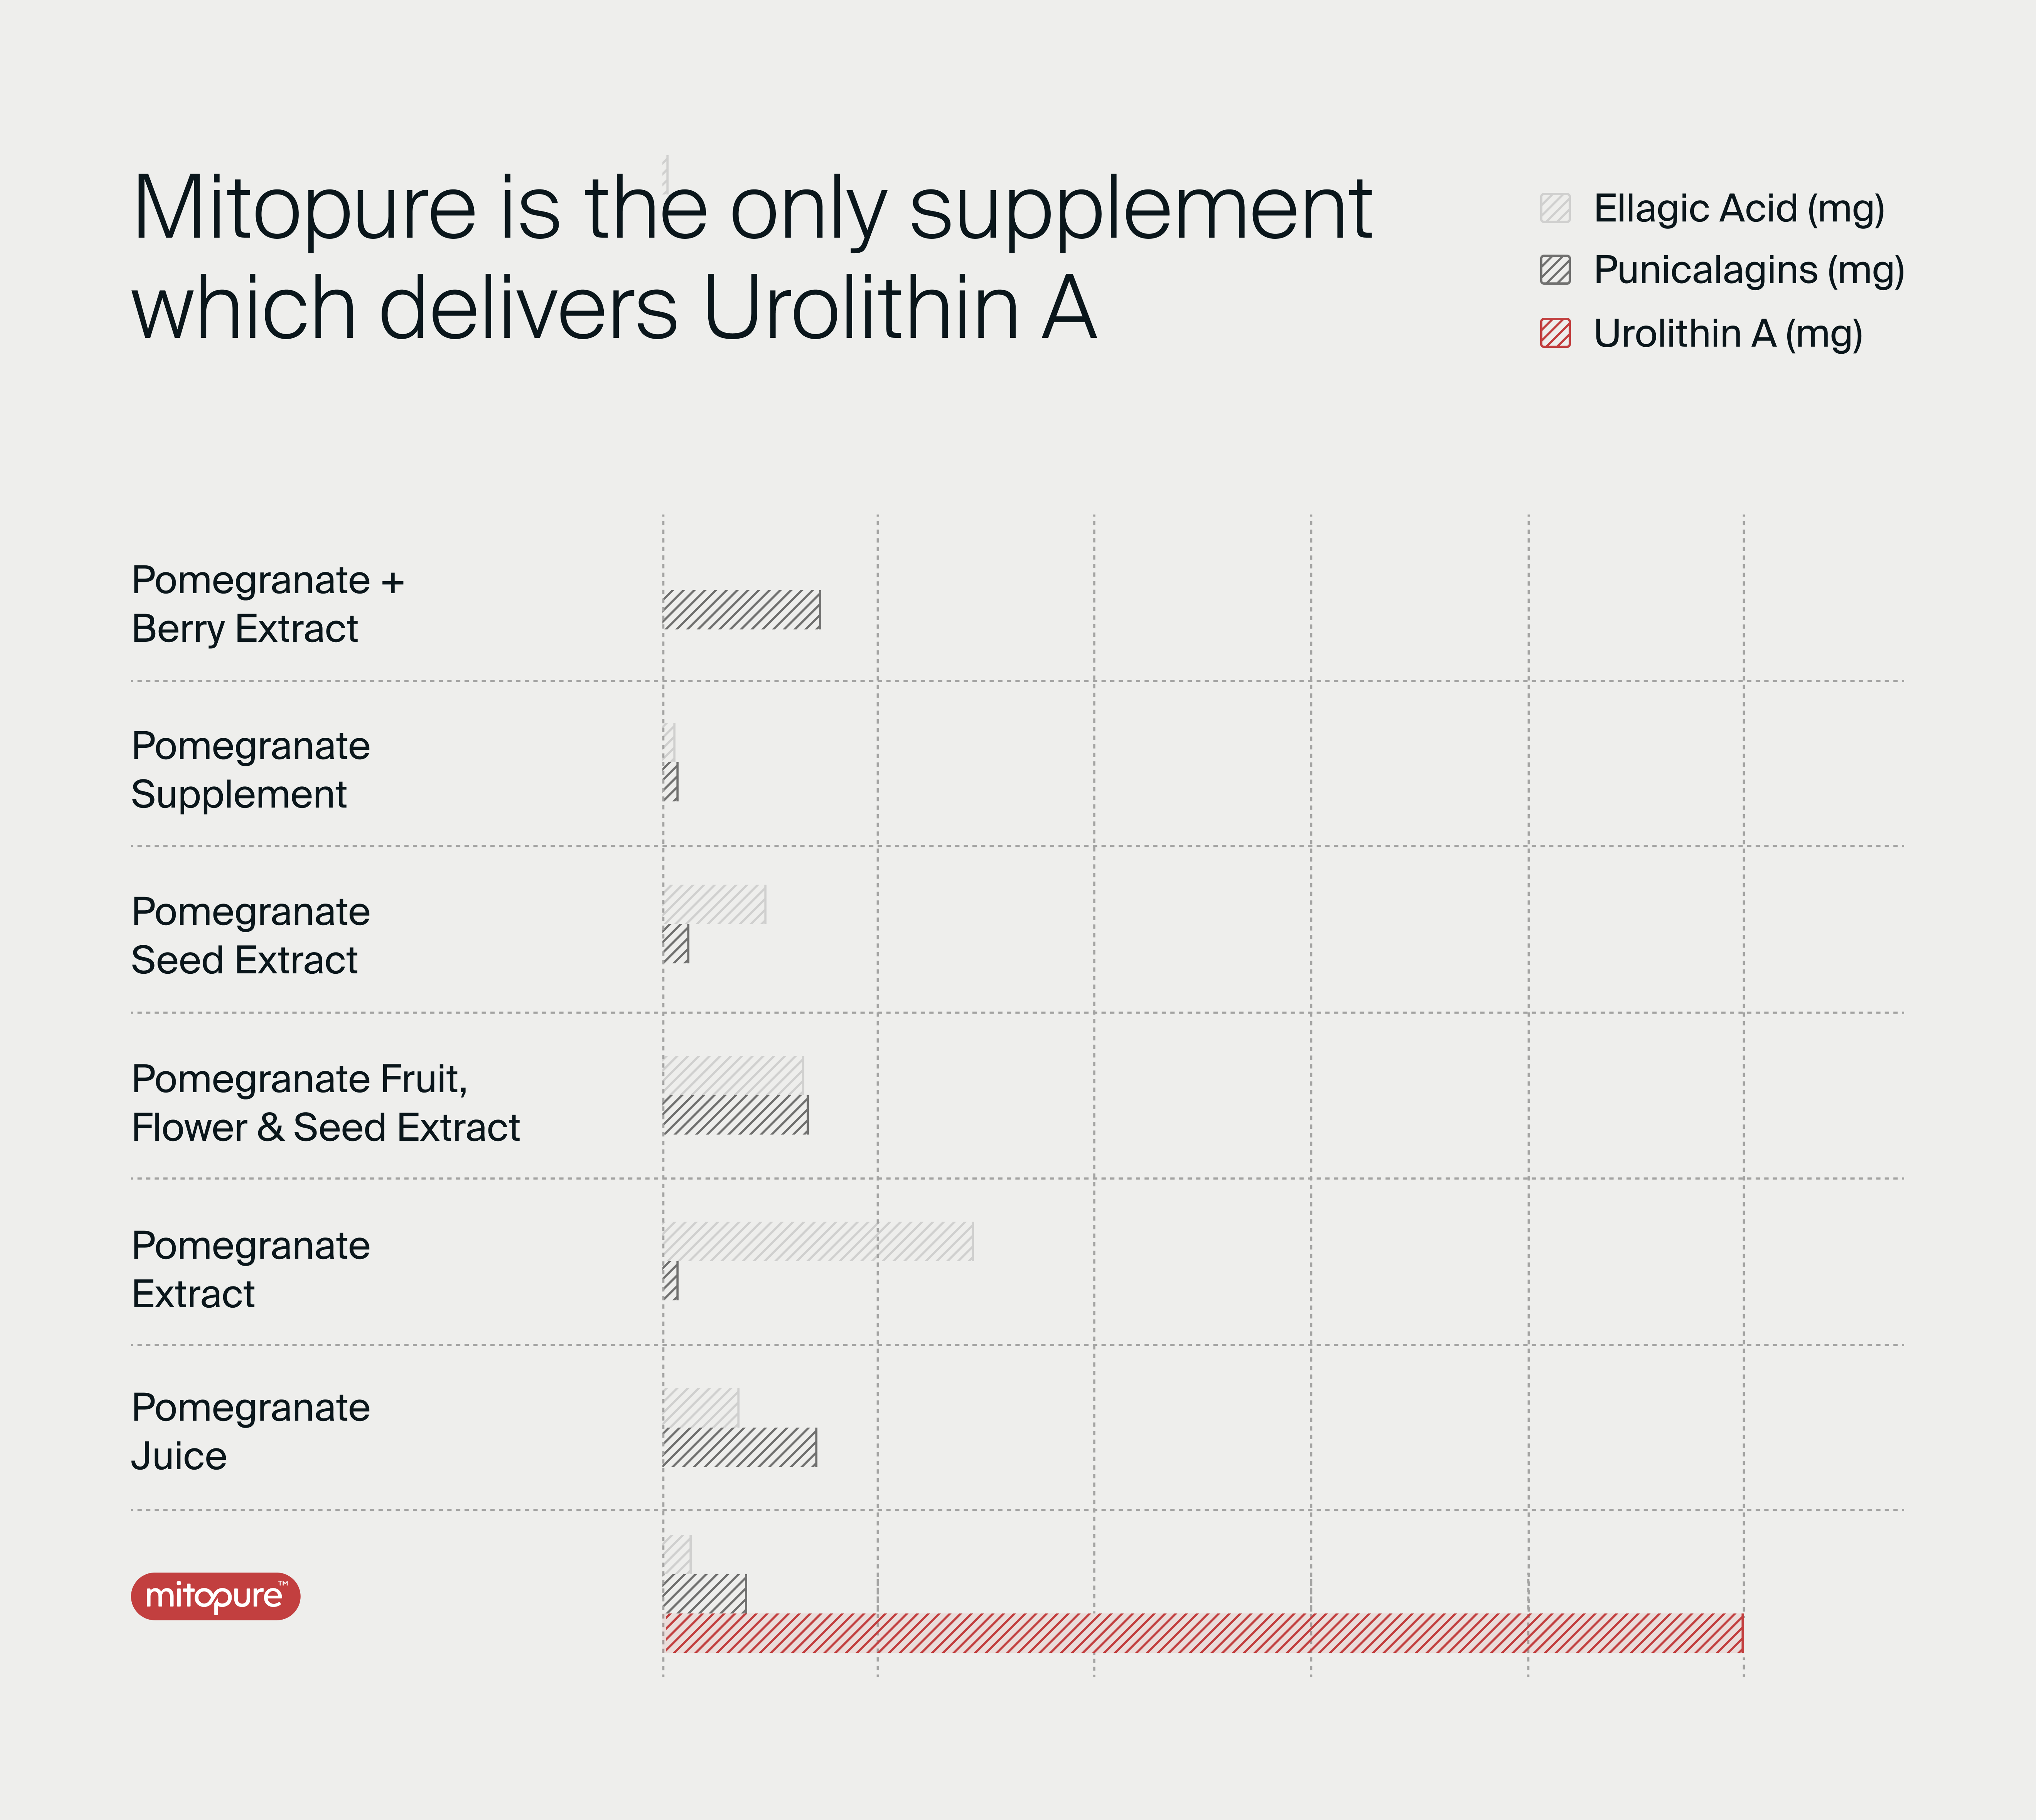 Comparison of the amount of different compounds detected after taking different supplements